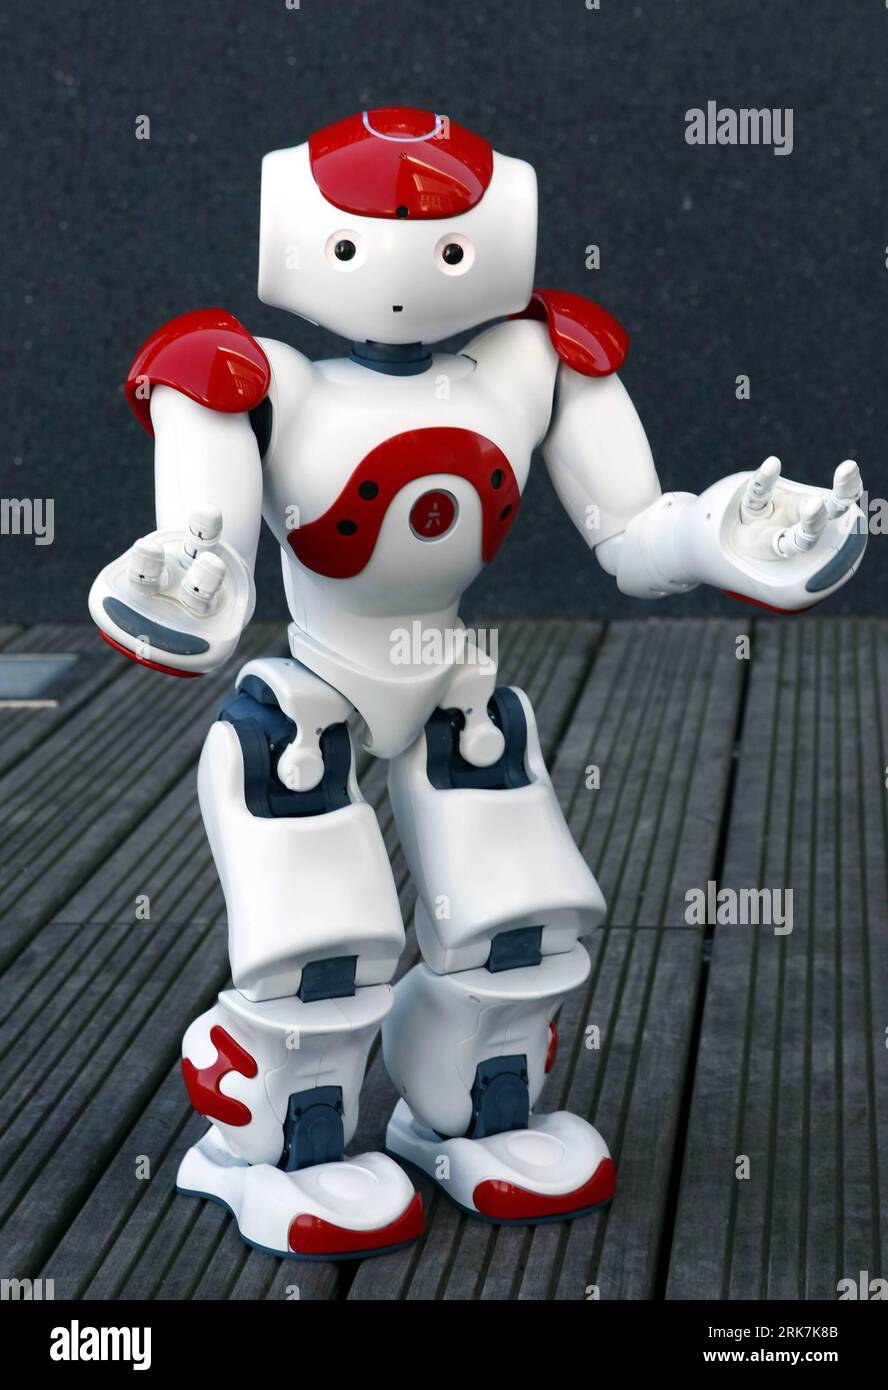 Bildnummer: 53923452  Datum: 06.04.2010  Copyright: imago/Xinhua (100407) -- PARIS, April 7, 2010 (Xinhua) -- A robot named Nao and developed by France s Aldebaran Company performs for in Paris April 6, 2010. The robot can speak fluent English, French and Chinese. It will be displayed at the Shanghai World Expo as the mascot of French Pavilion. (Xinhua/Zhang Yuwei) (dyw) (6)FRANCE-PARIS-ROBOT-SHANGHAI WORLD EXPO PUBLICATIONxNOTxINxCHN Gesellschaft Wirtschaft Weltausstellung Roboter kbdig xub 2010 hoch premiumd xint     Bildnummer 53923452 Date 06 04 2010 Copyright Imago XINHUA  Paris April 7 2 Stock Photo